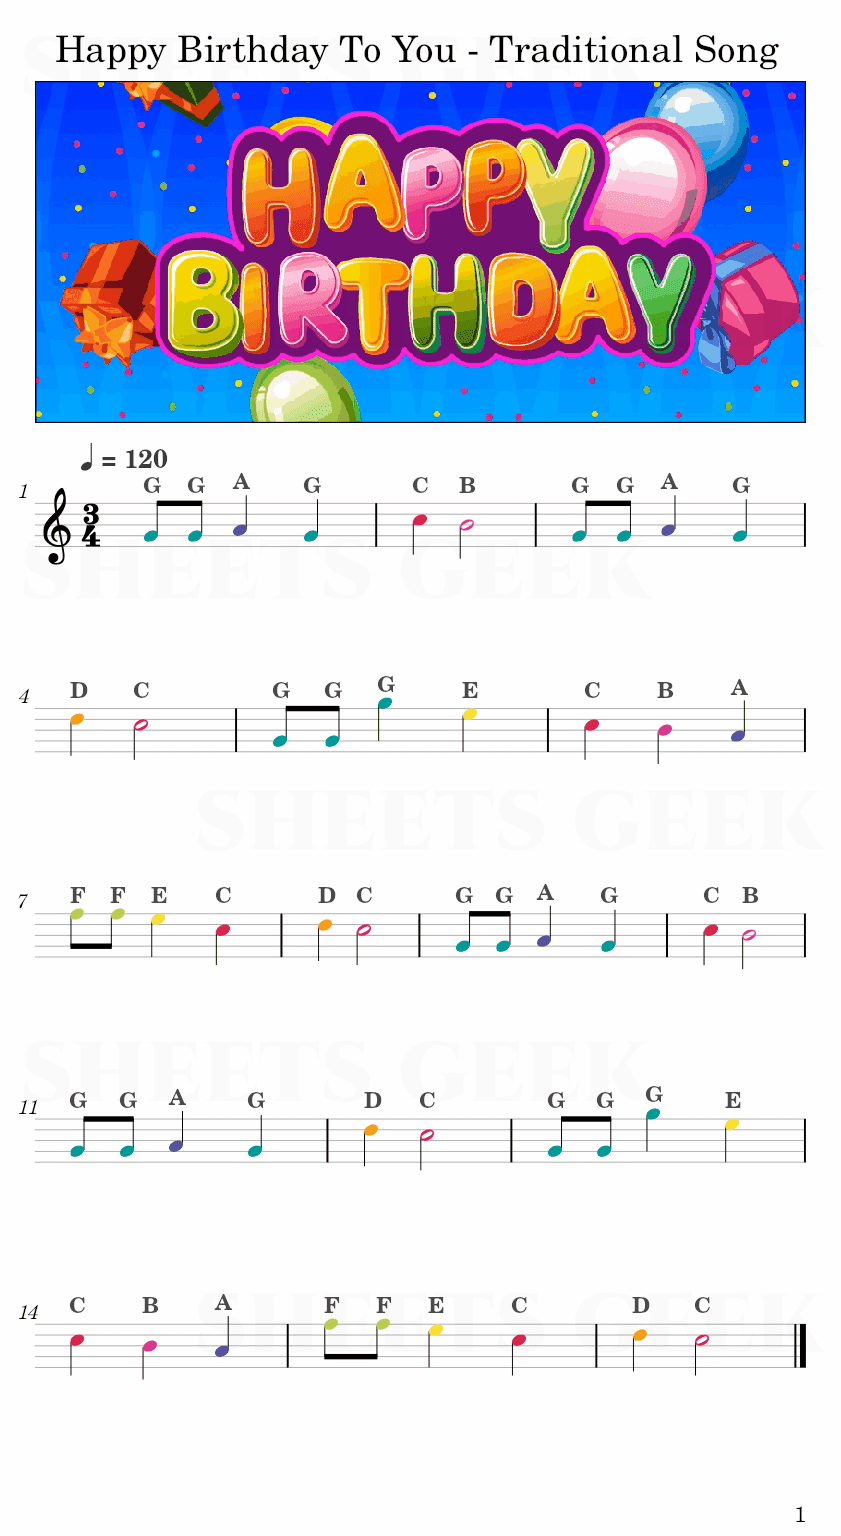 Happy Birthday To You - Traditional Birthday Song Easy Sheet Music Free for piano, keyboard, flute, violin, sax, cello page 1